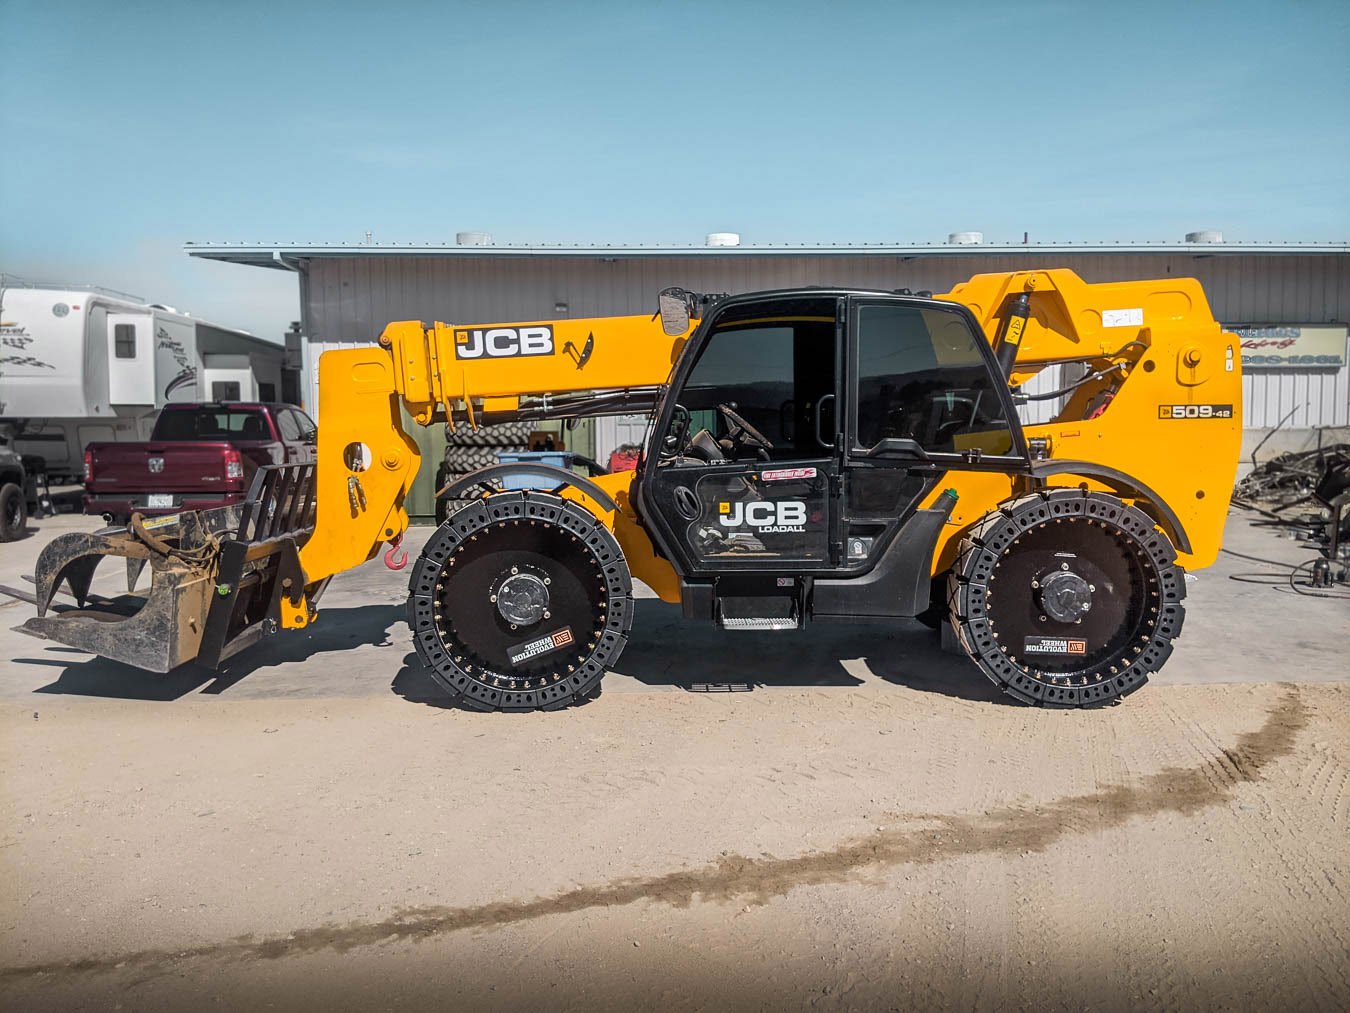 This picture shows our JLG telehandler tires on a black and yellow JCB telehandler